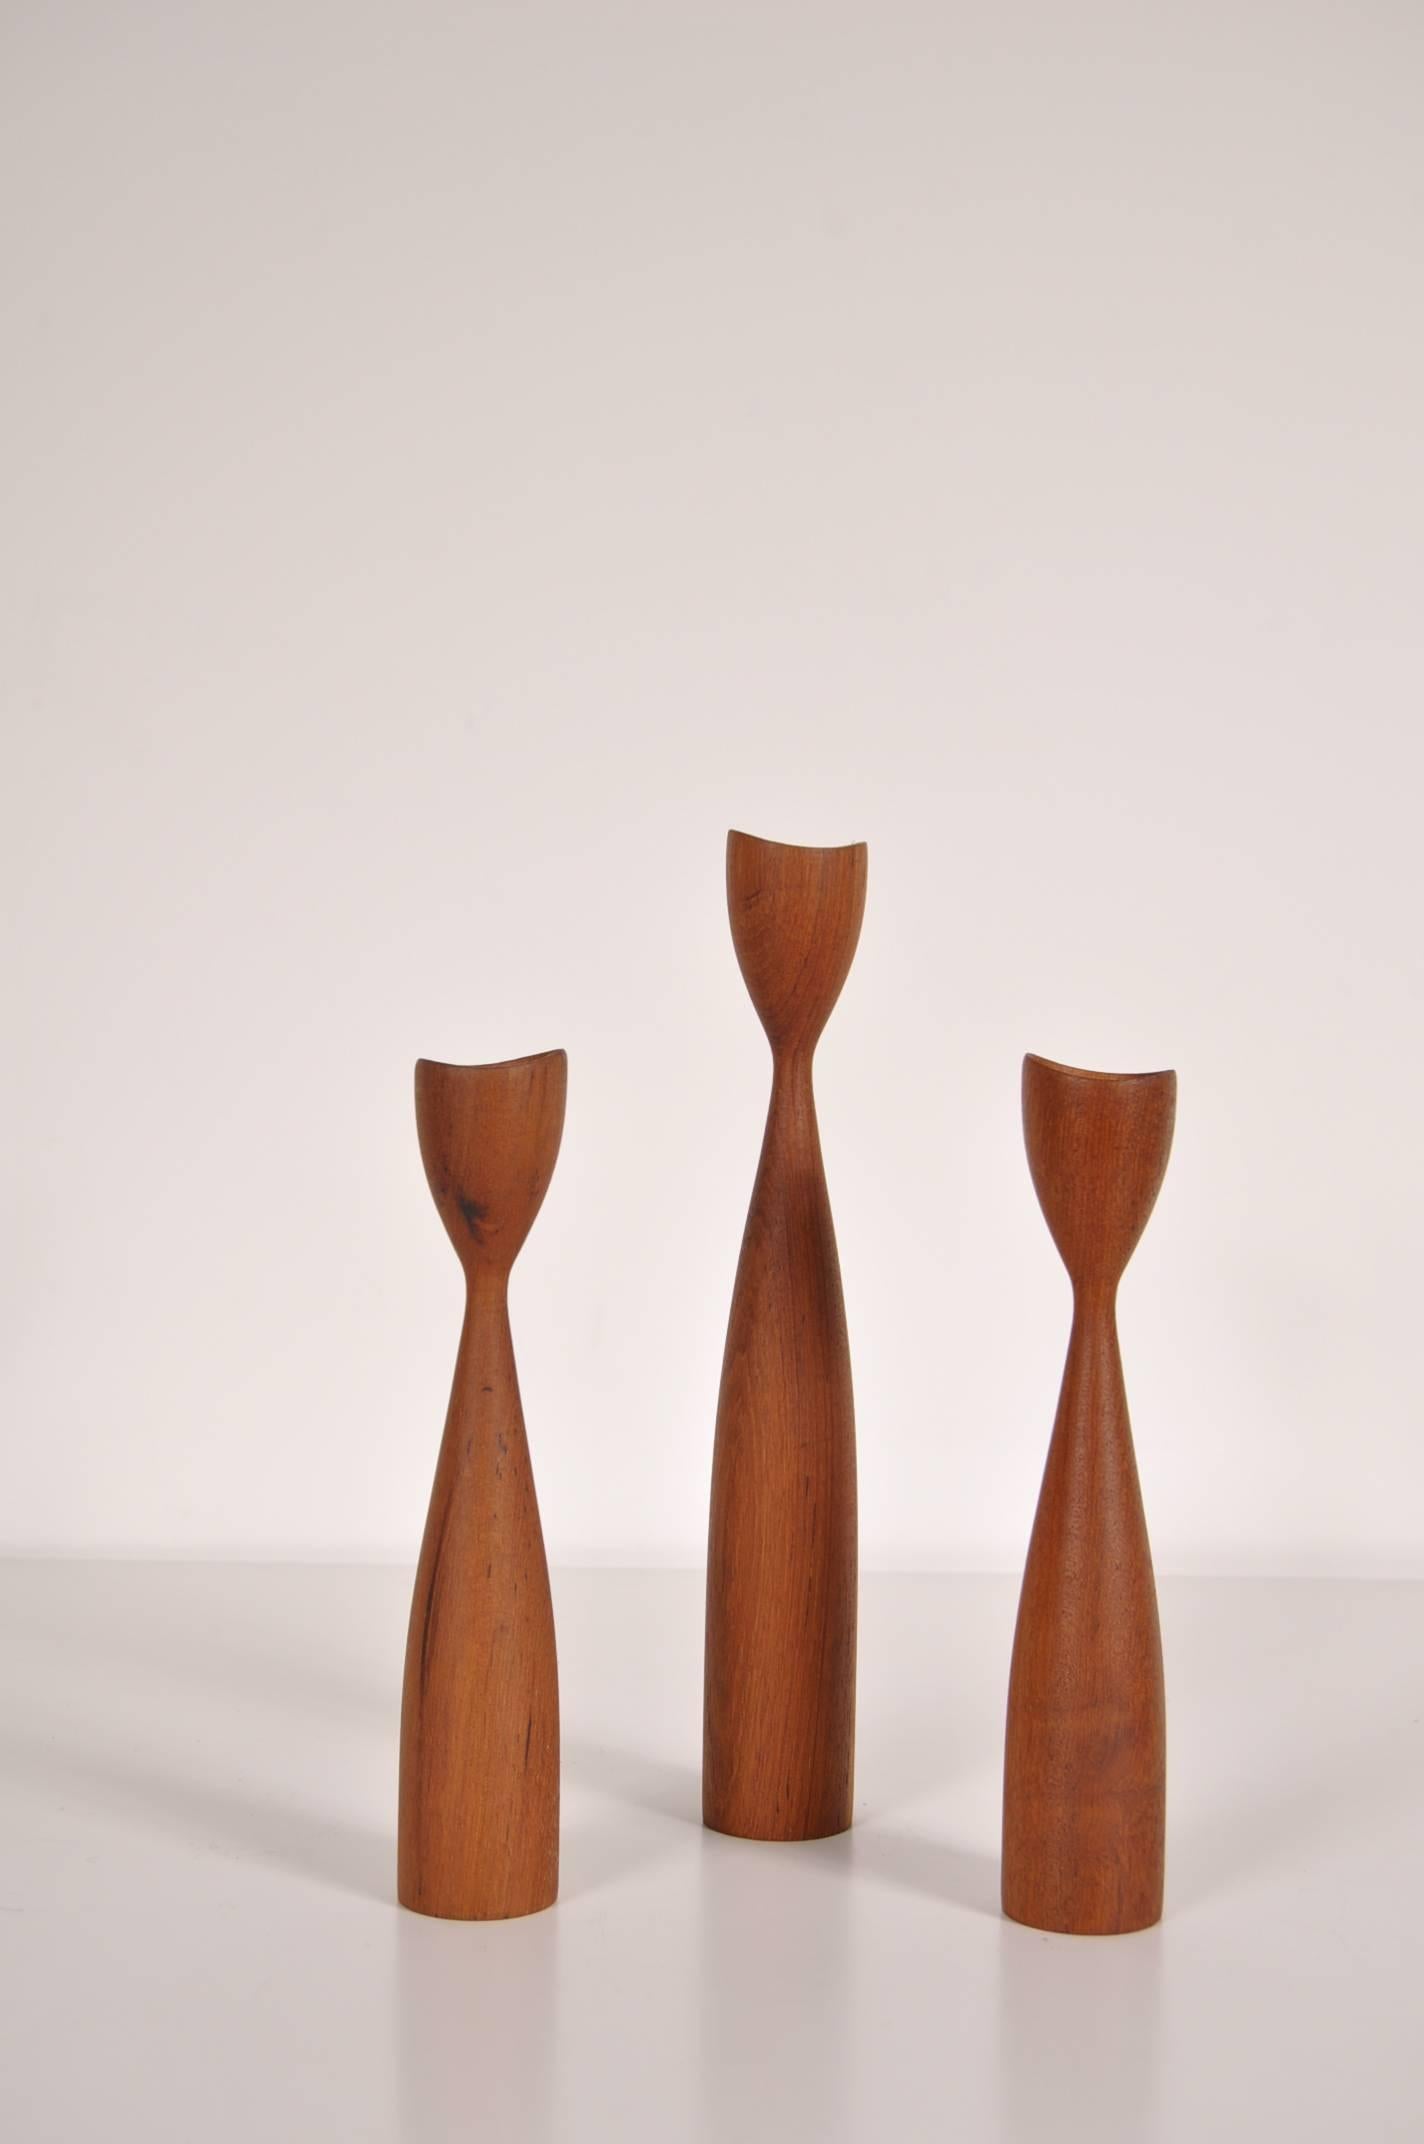 Teak Set of Three Candle Holders in the Style of Rude Osolnik, Denmark, circa 1950